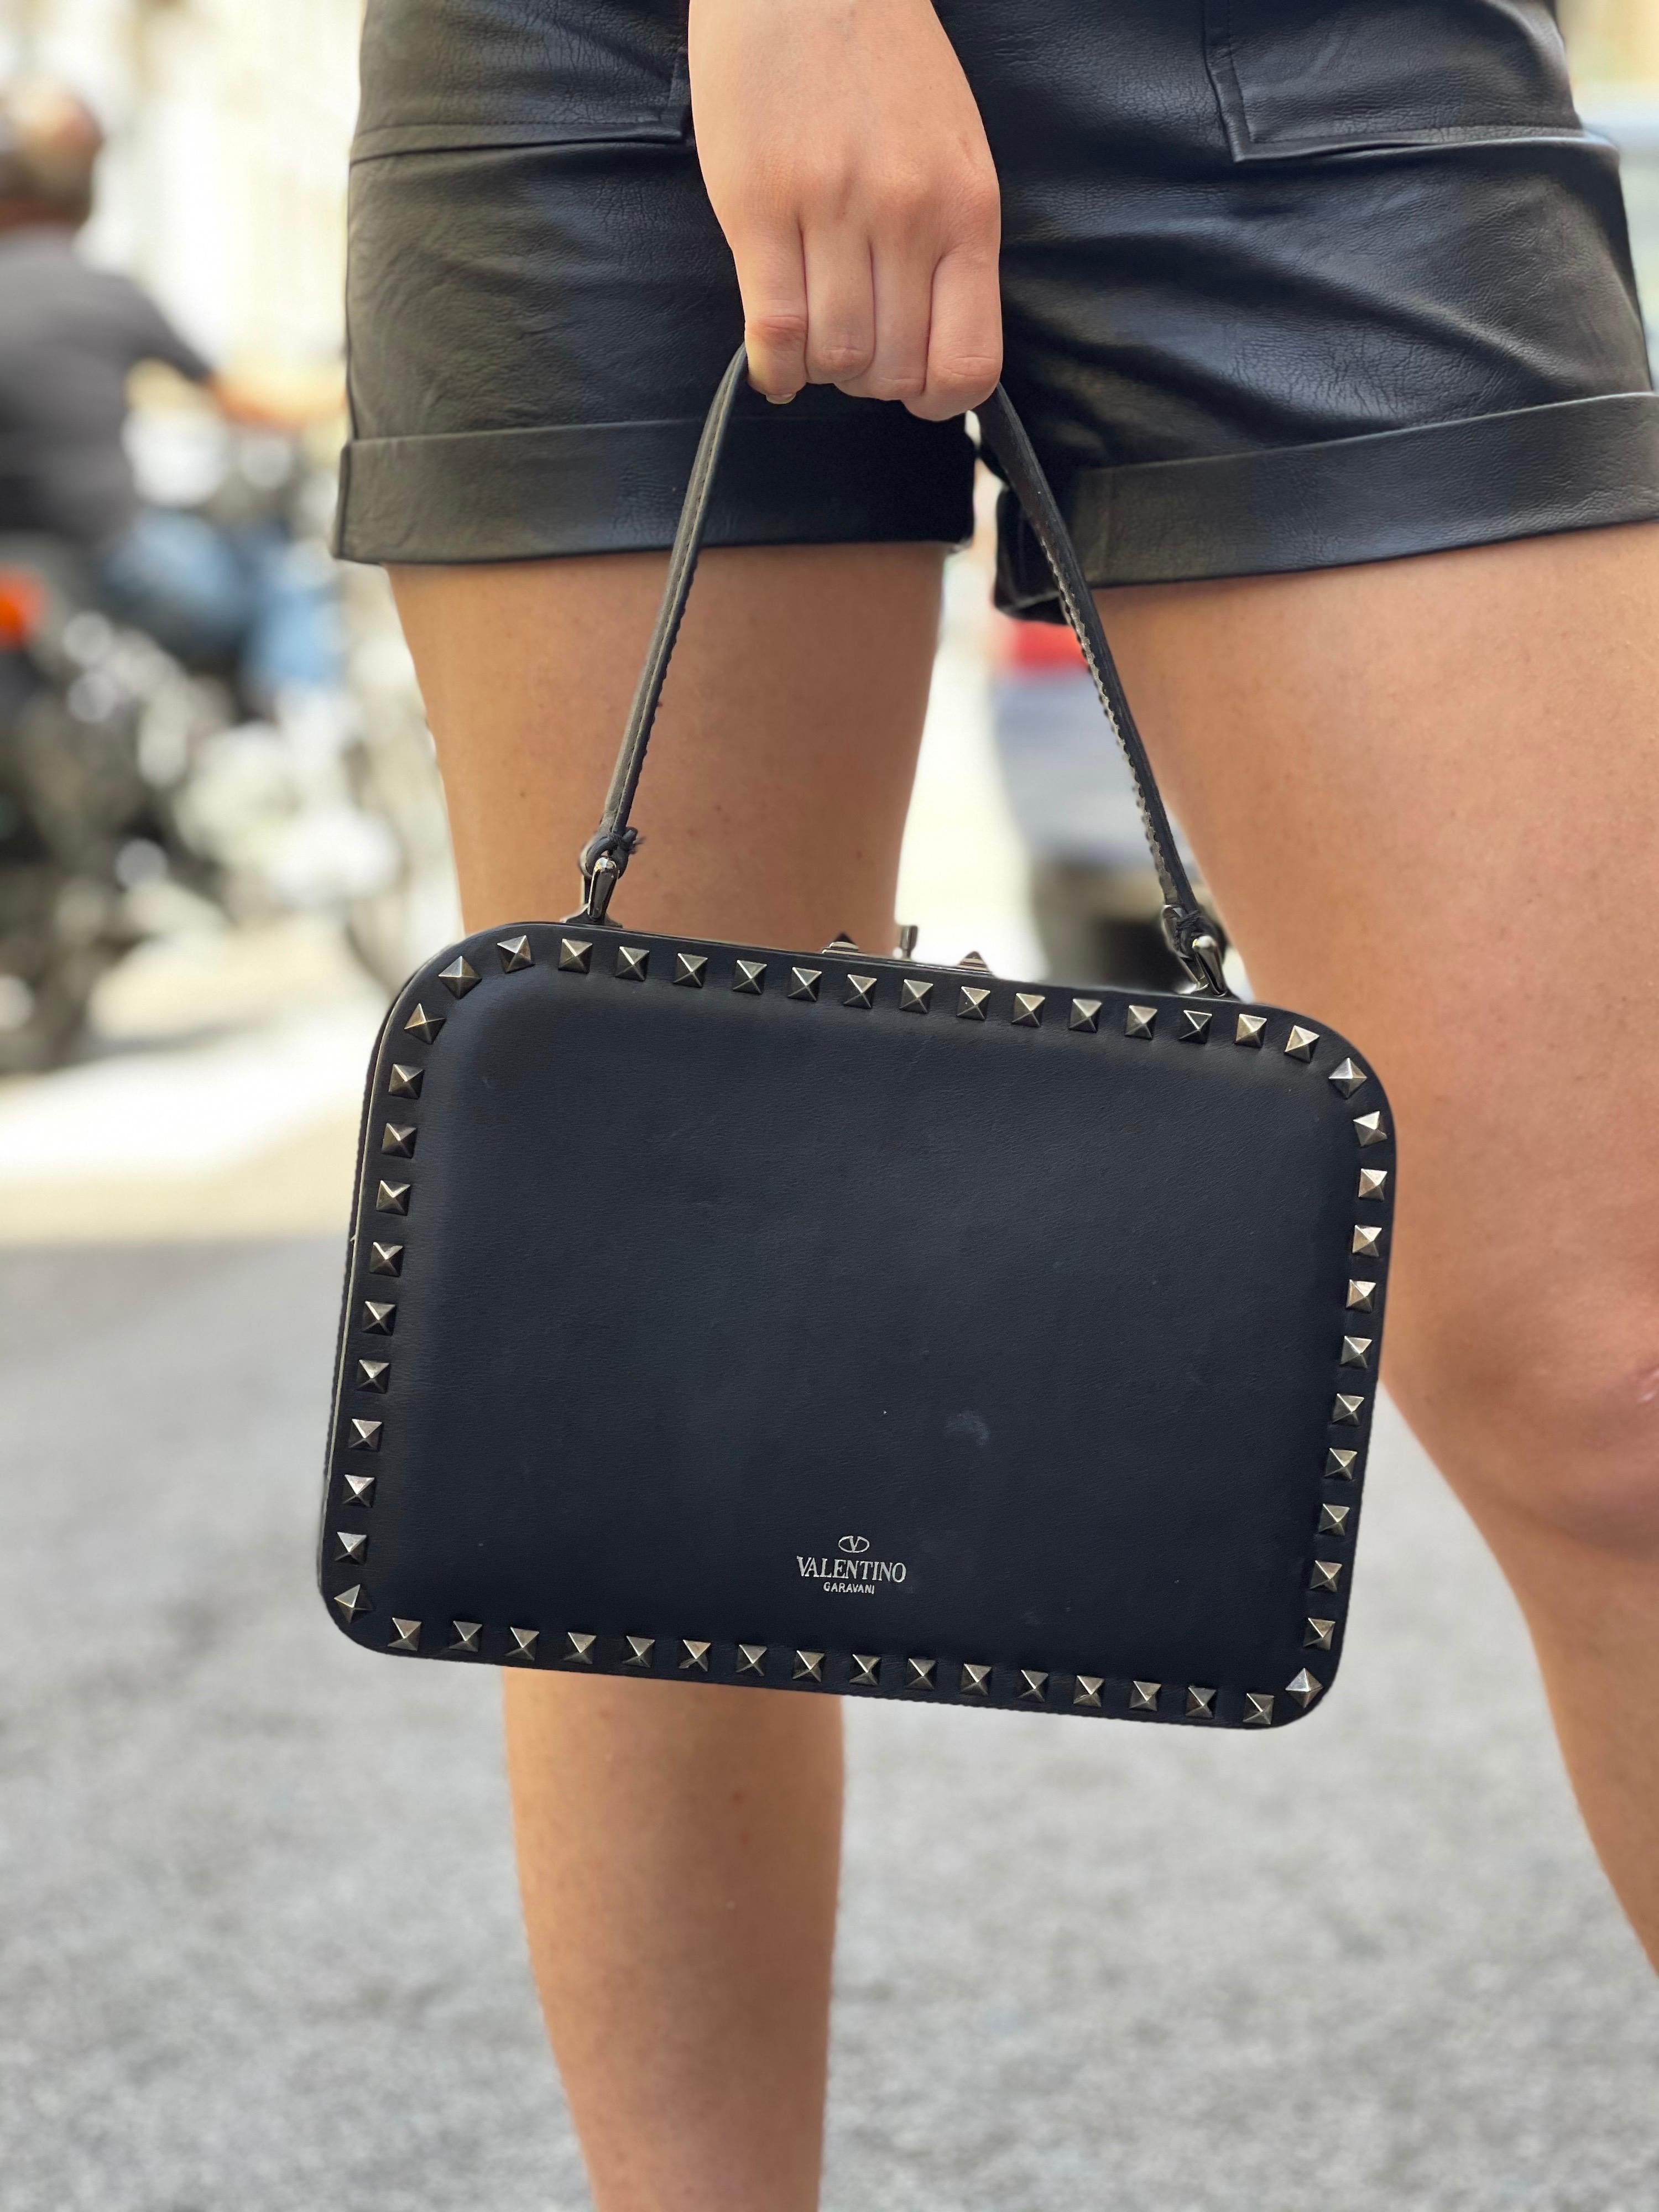 Valentino Rockstud line bag made of black leather with studs and silver hardware.
Equipped with a leather upper handle to wear it by hand or on the shoulder.
Interlocking closure, internally capacious for the essential.
It is in good condition.